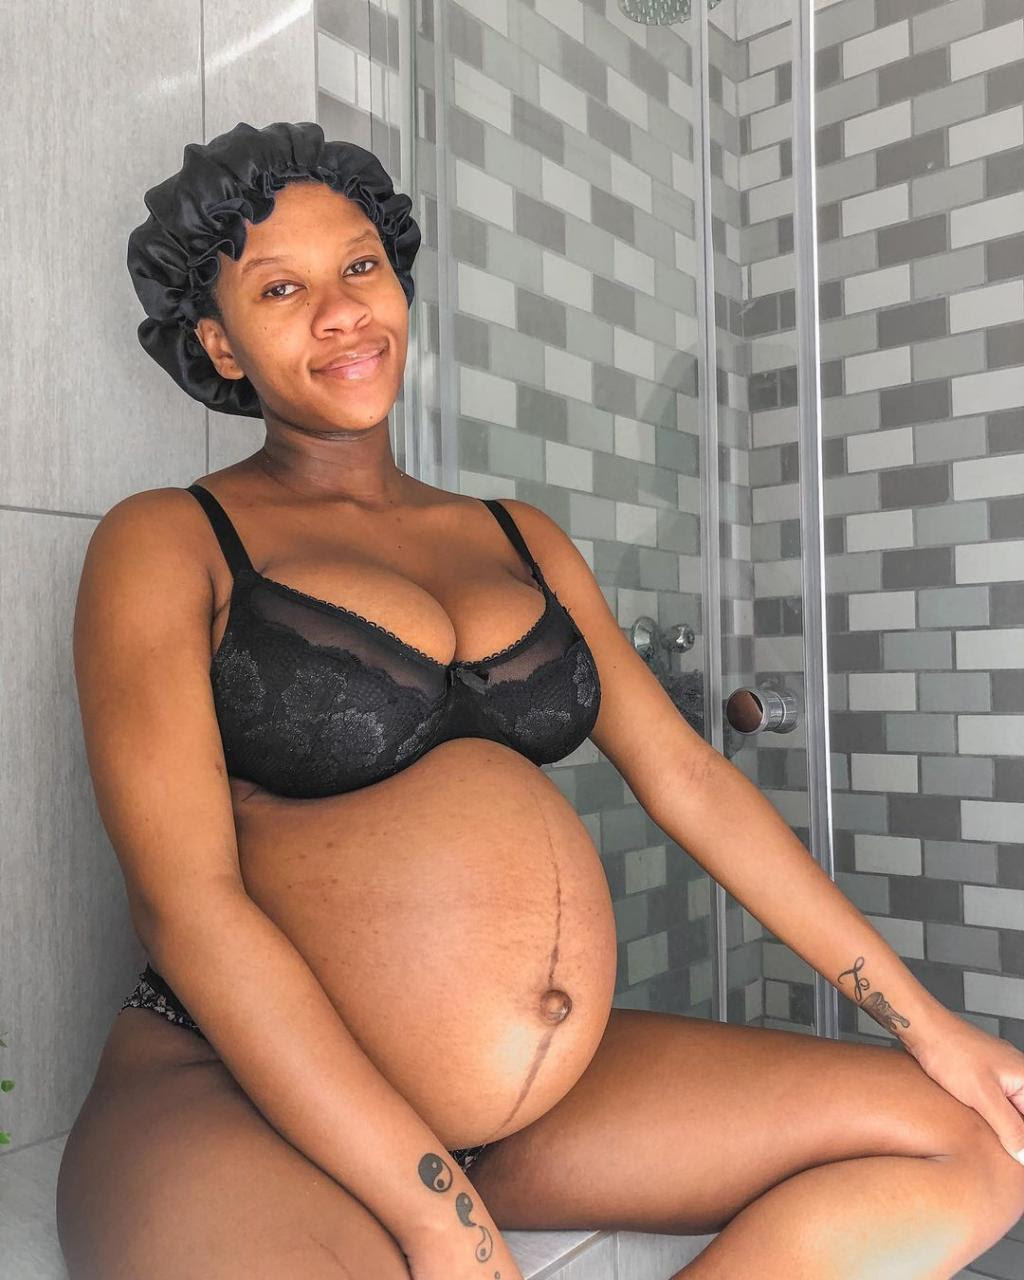 Pregnant Abby Chioma flaunts her blossoming baby bump, admits pregnancy is 